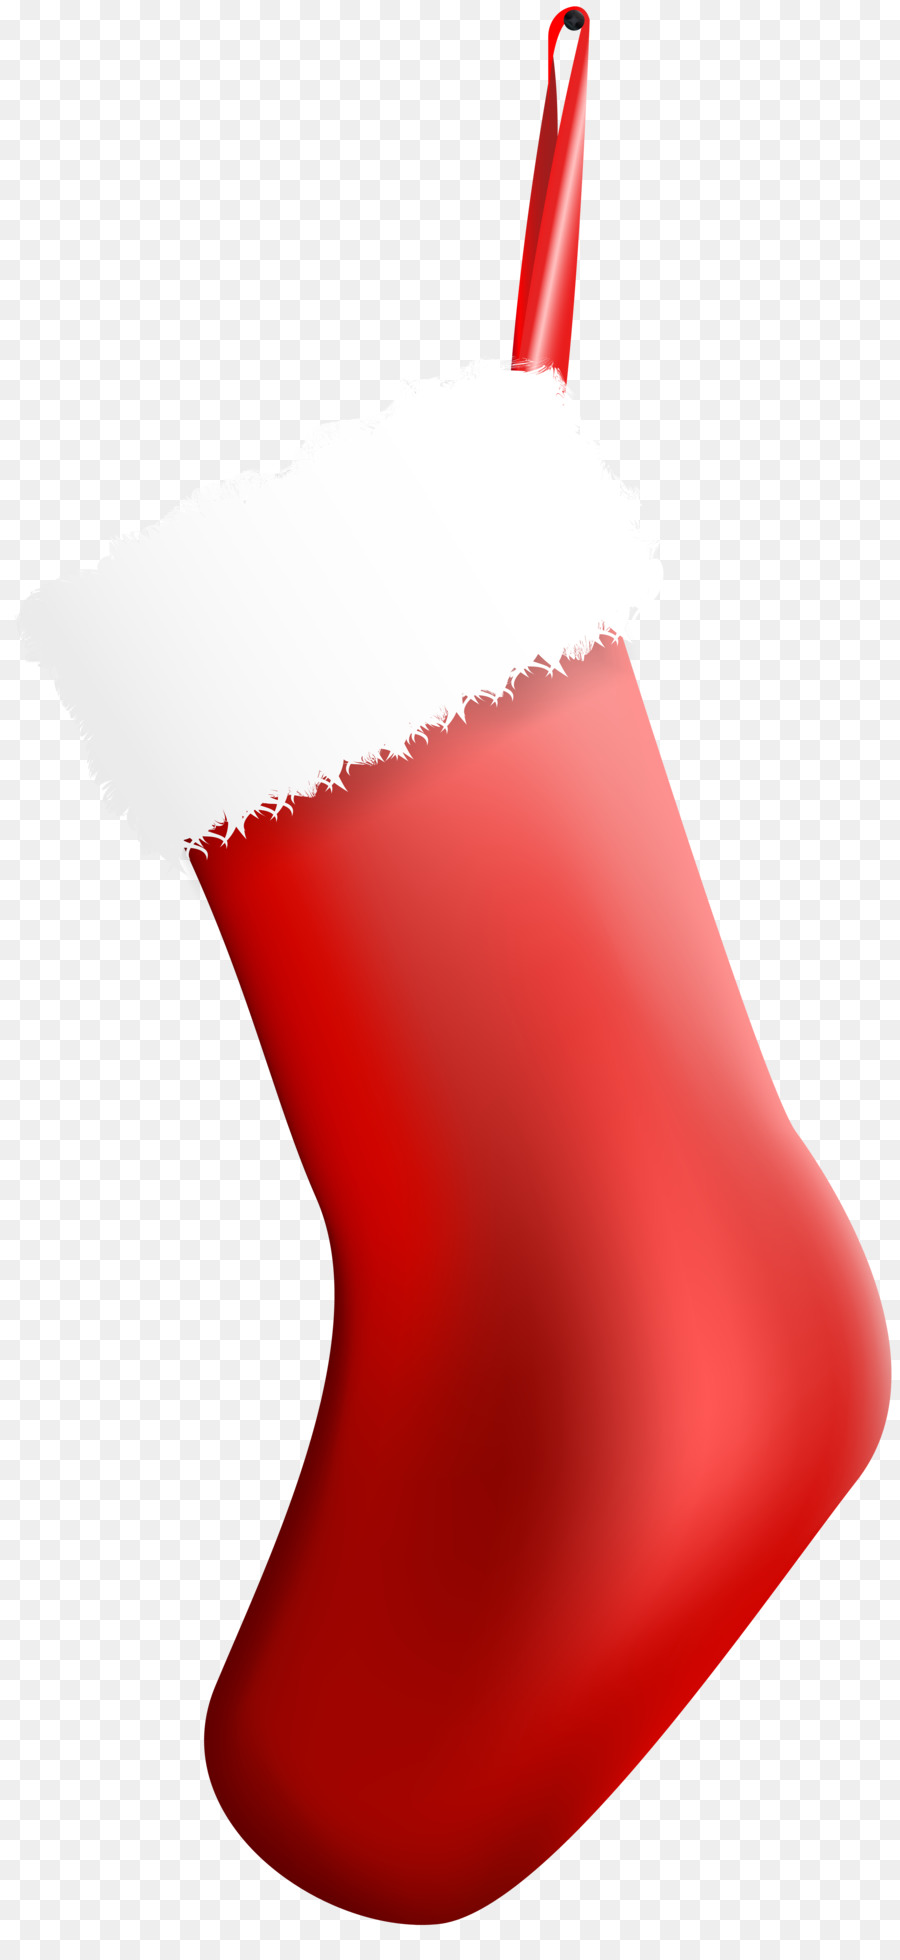 Christmas Stockings Christmas decoration Clip art - stock png download - 3707*8000 - Free Transparent Christmas Stockings png Download.